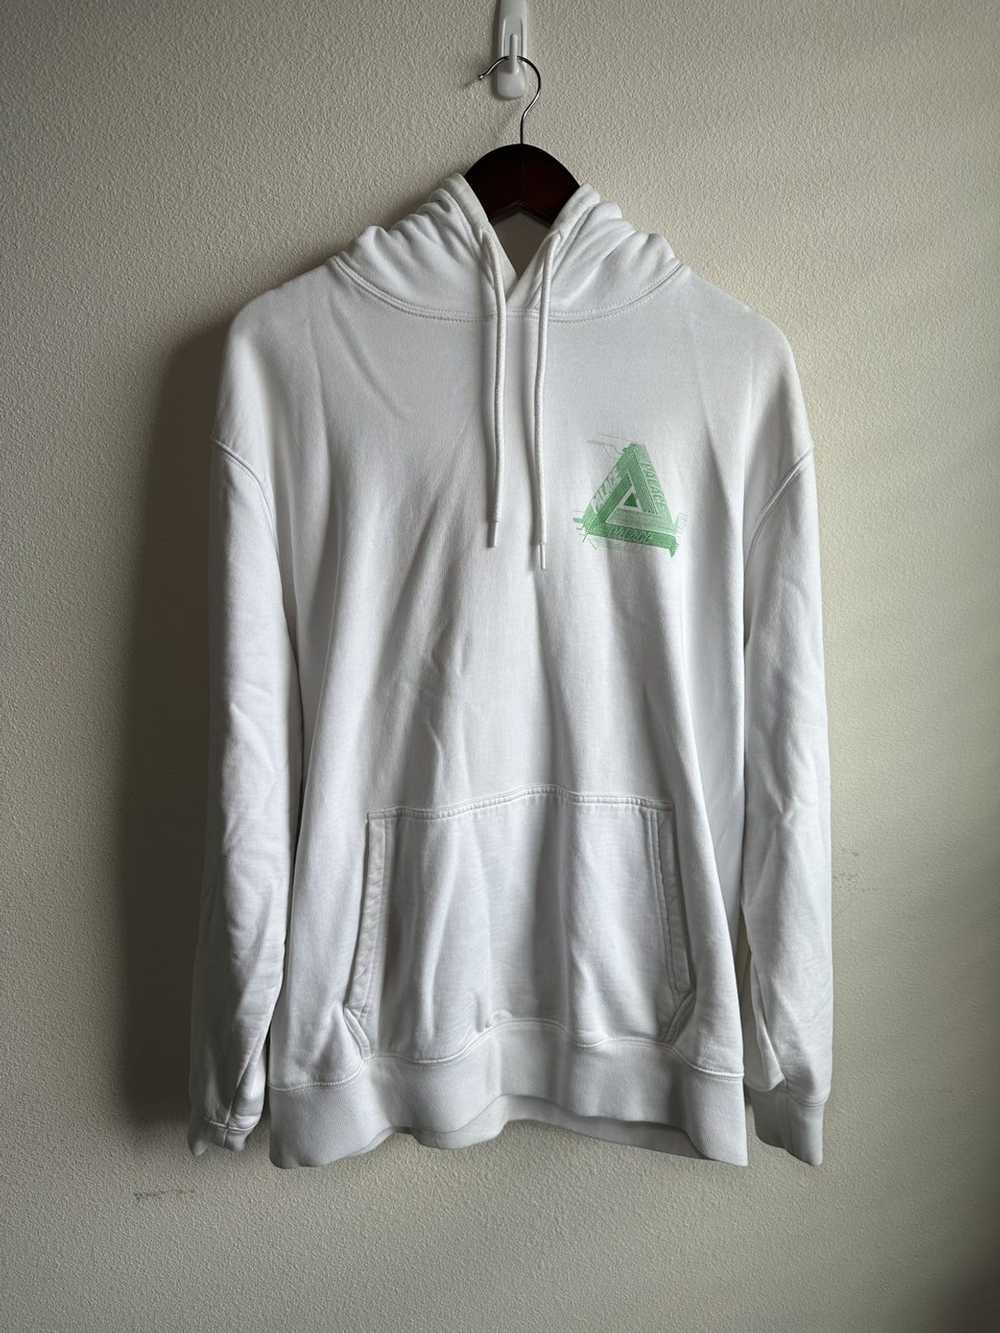 Palace Palace Tri-Ferg OG Glow in the Dark Hoodie - image 2